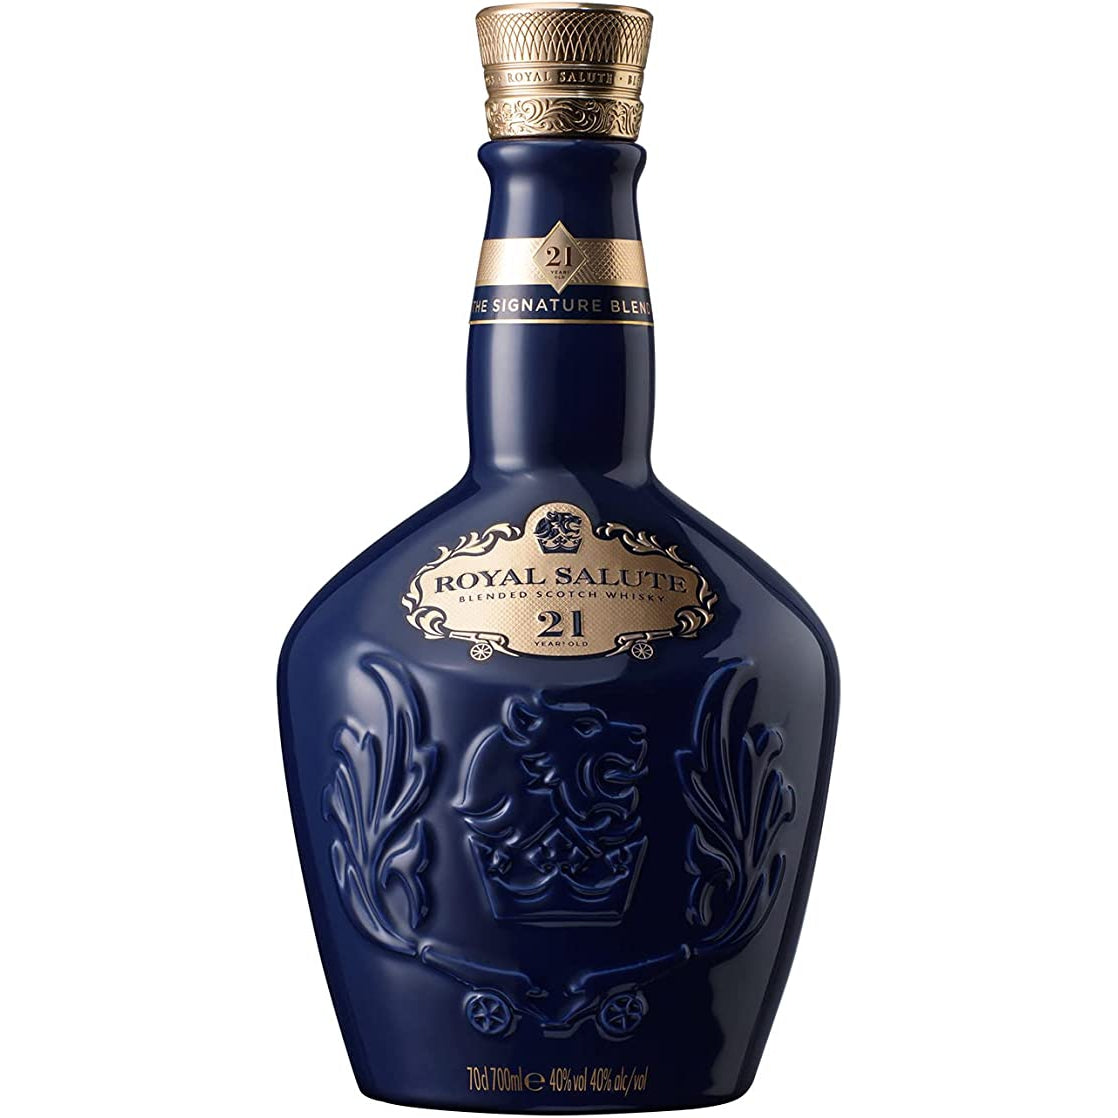 Royal Salute 21 Years Old THE PEATED BLEND 40% Vol. 0,7l in Giftbox